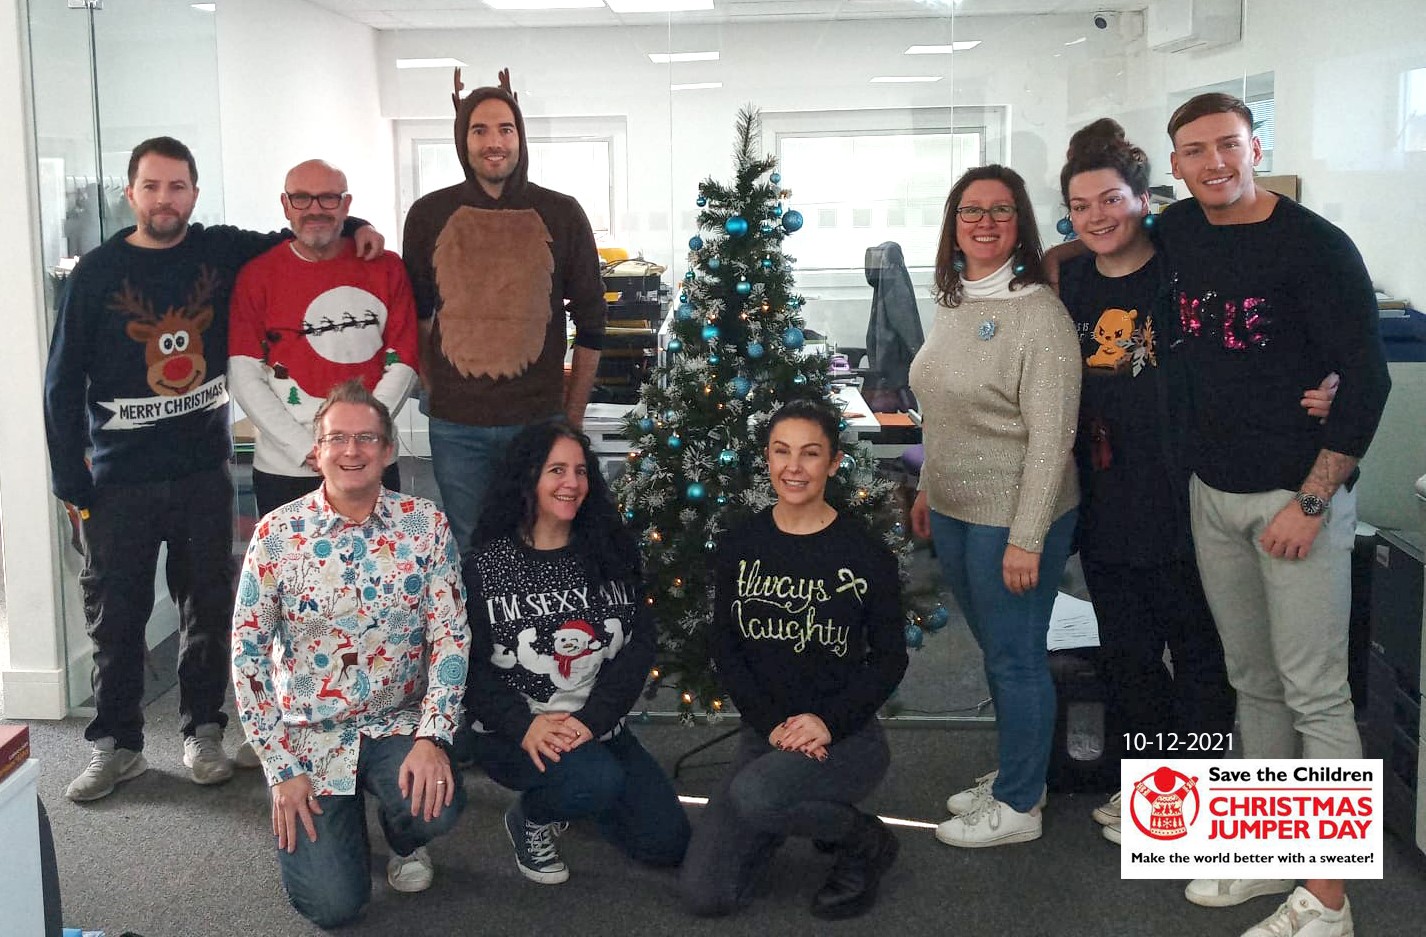 BetweenGlassBlinds were in the holiday spirit on Friday to support Save The Children's Christmas Jumper Day 2021